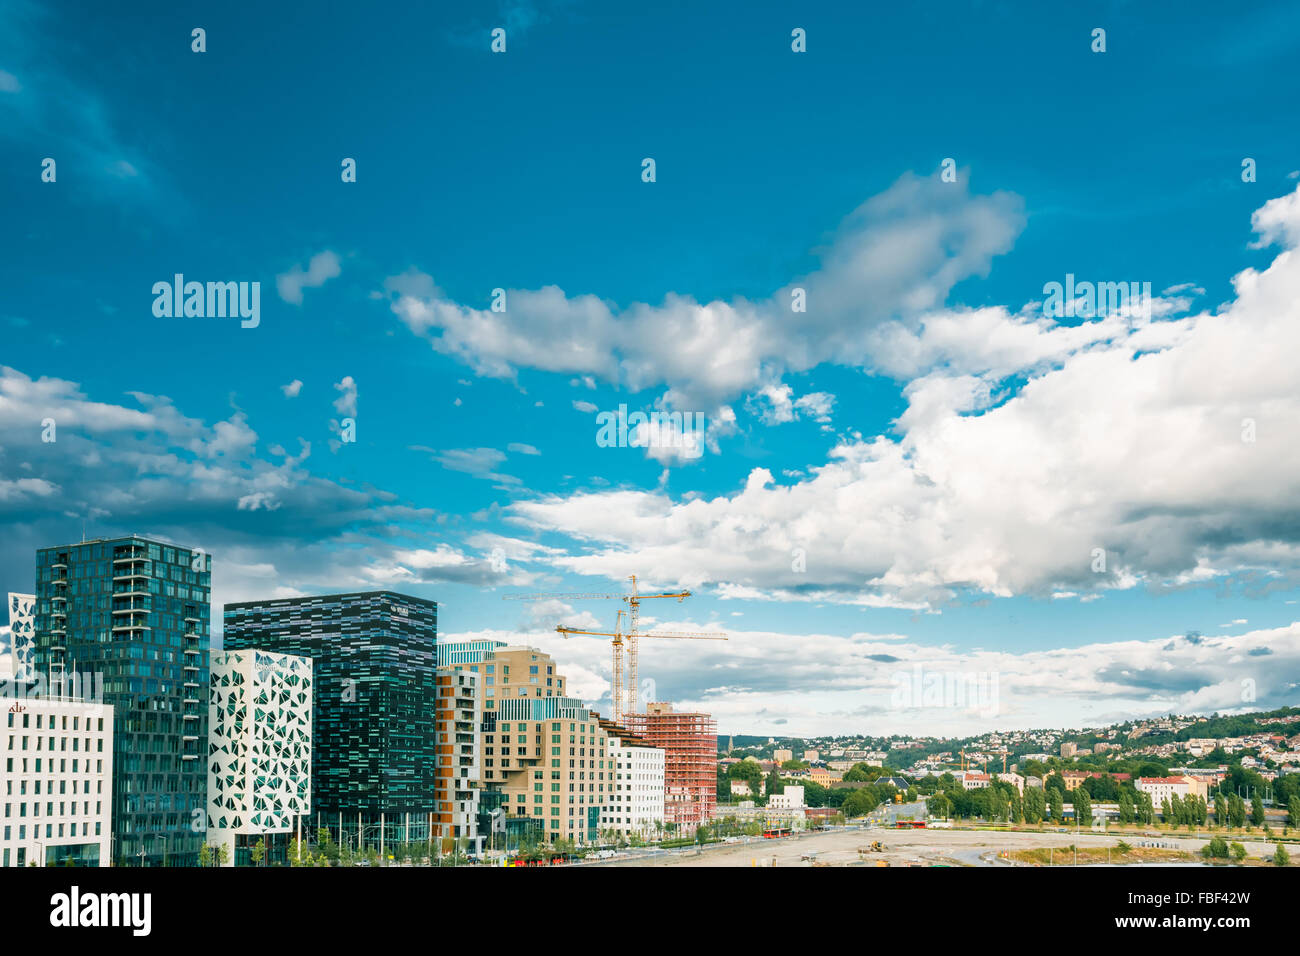 OSLO, NORWAY - JULY 31, 2014: View of Cityscape in Oslo, Norway. Summer Season Stock Photo